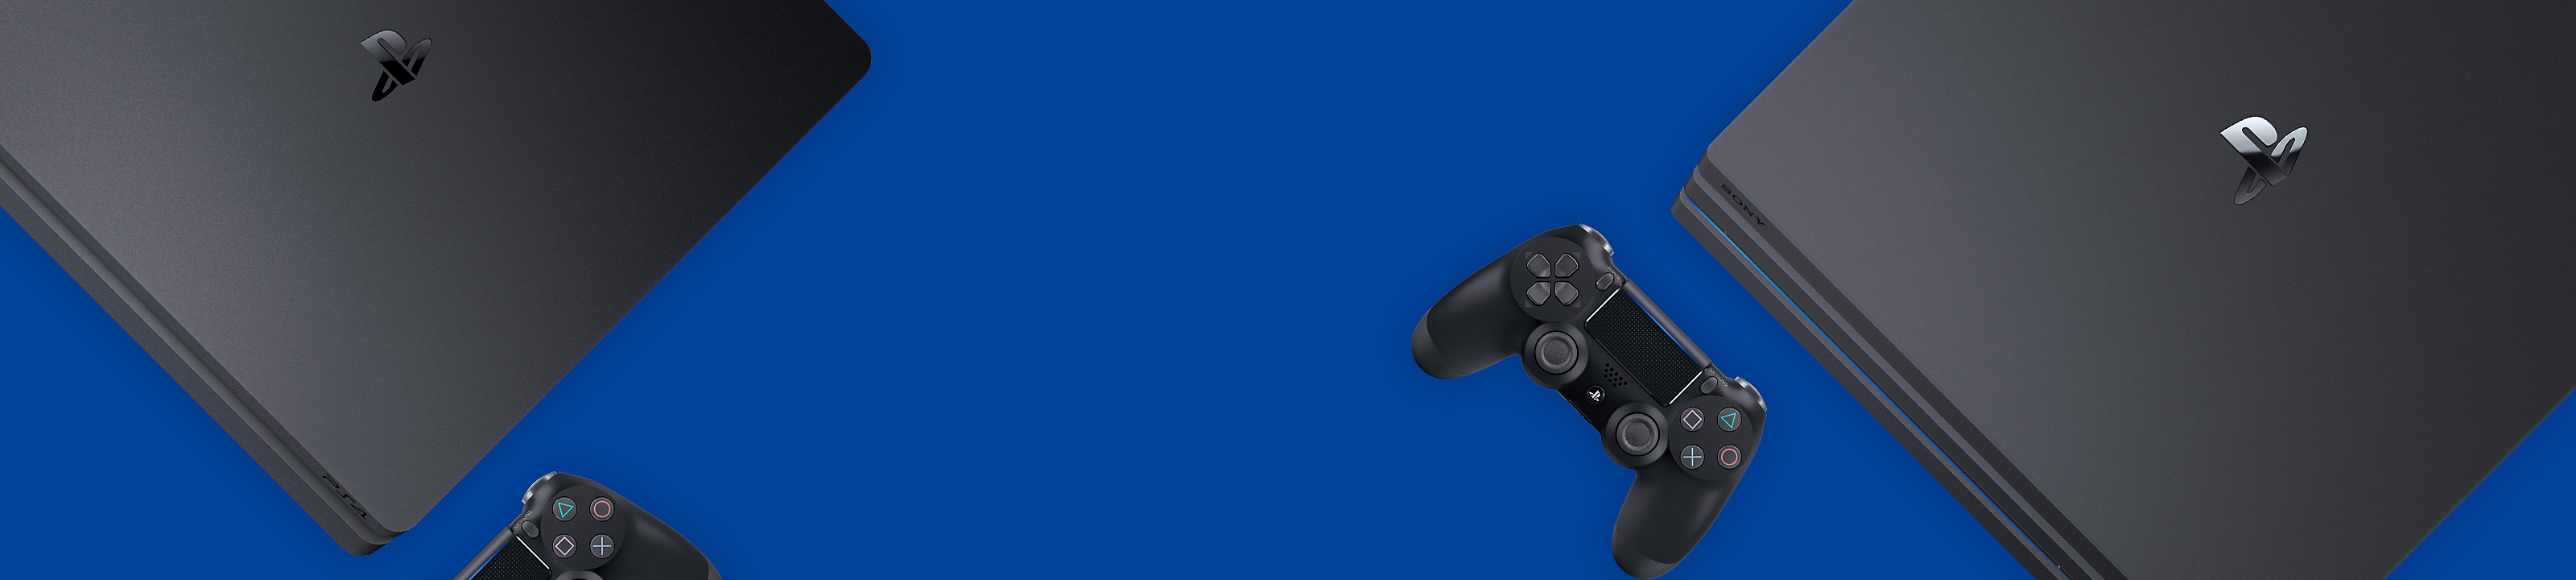 PS4-banner